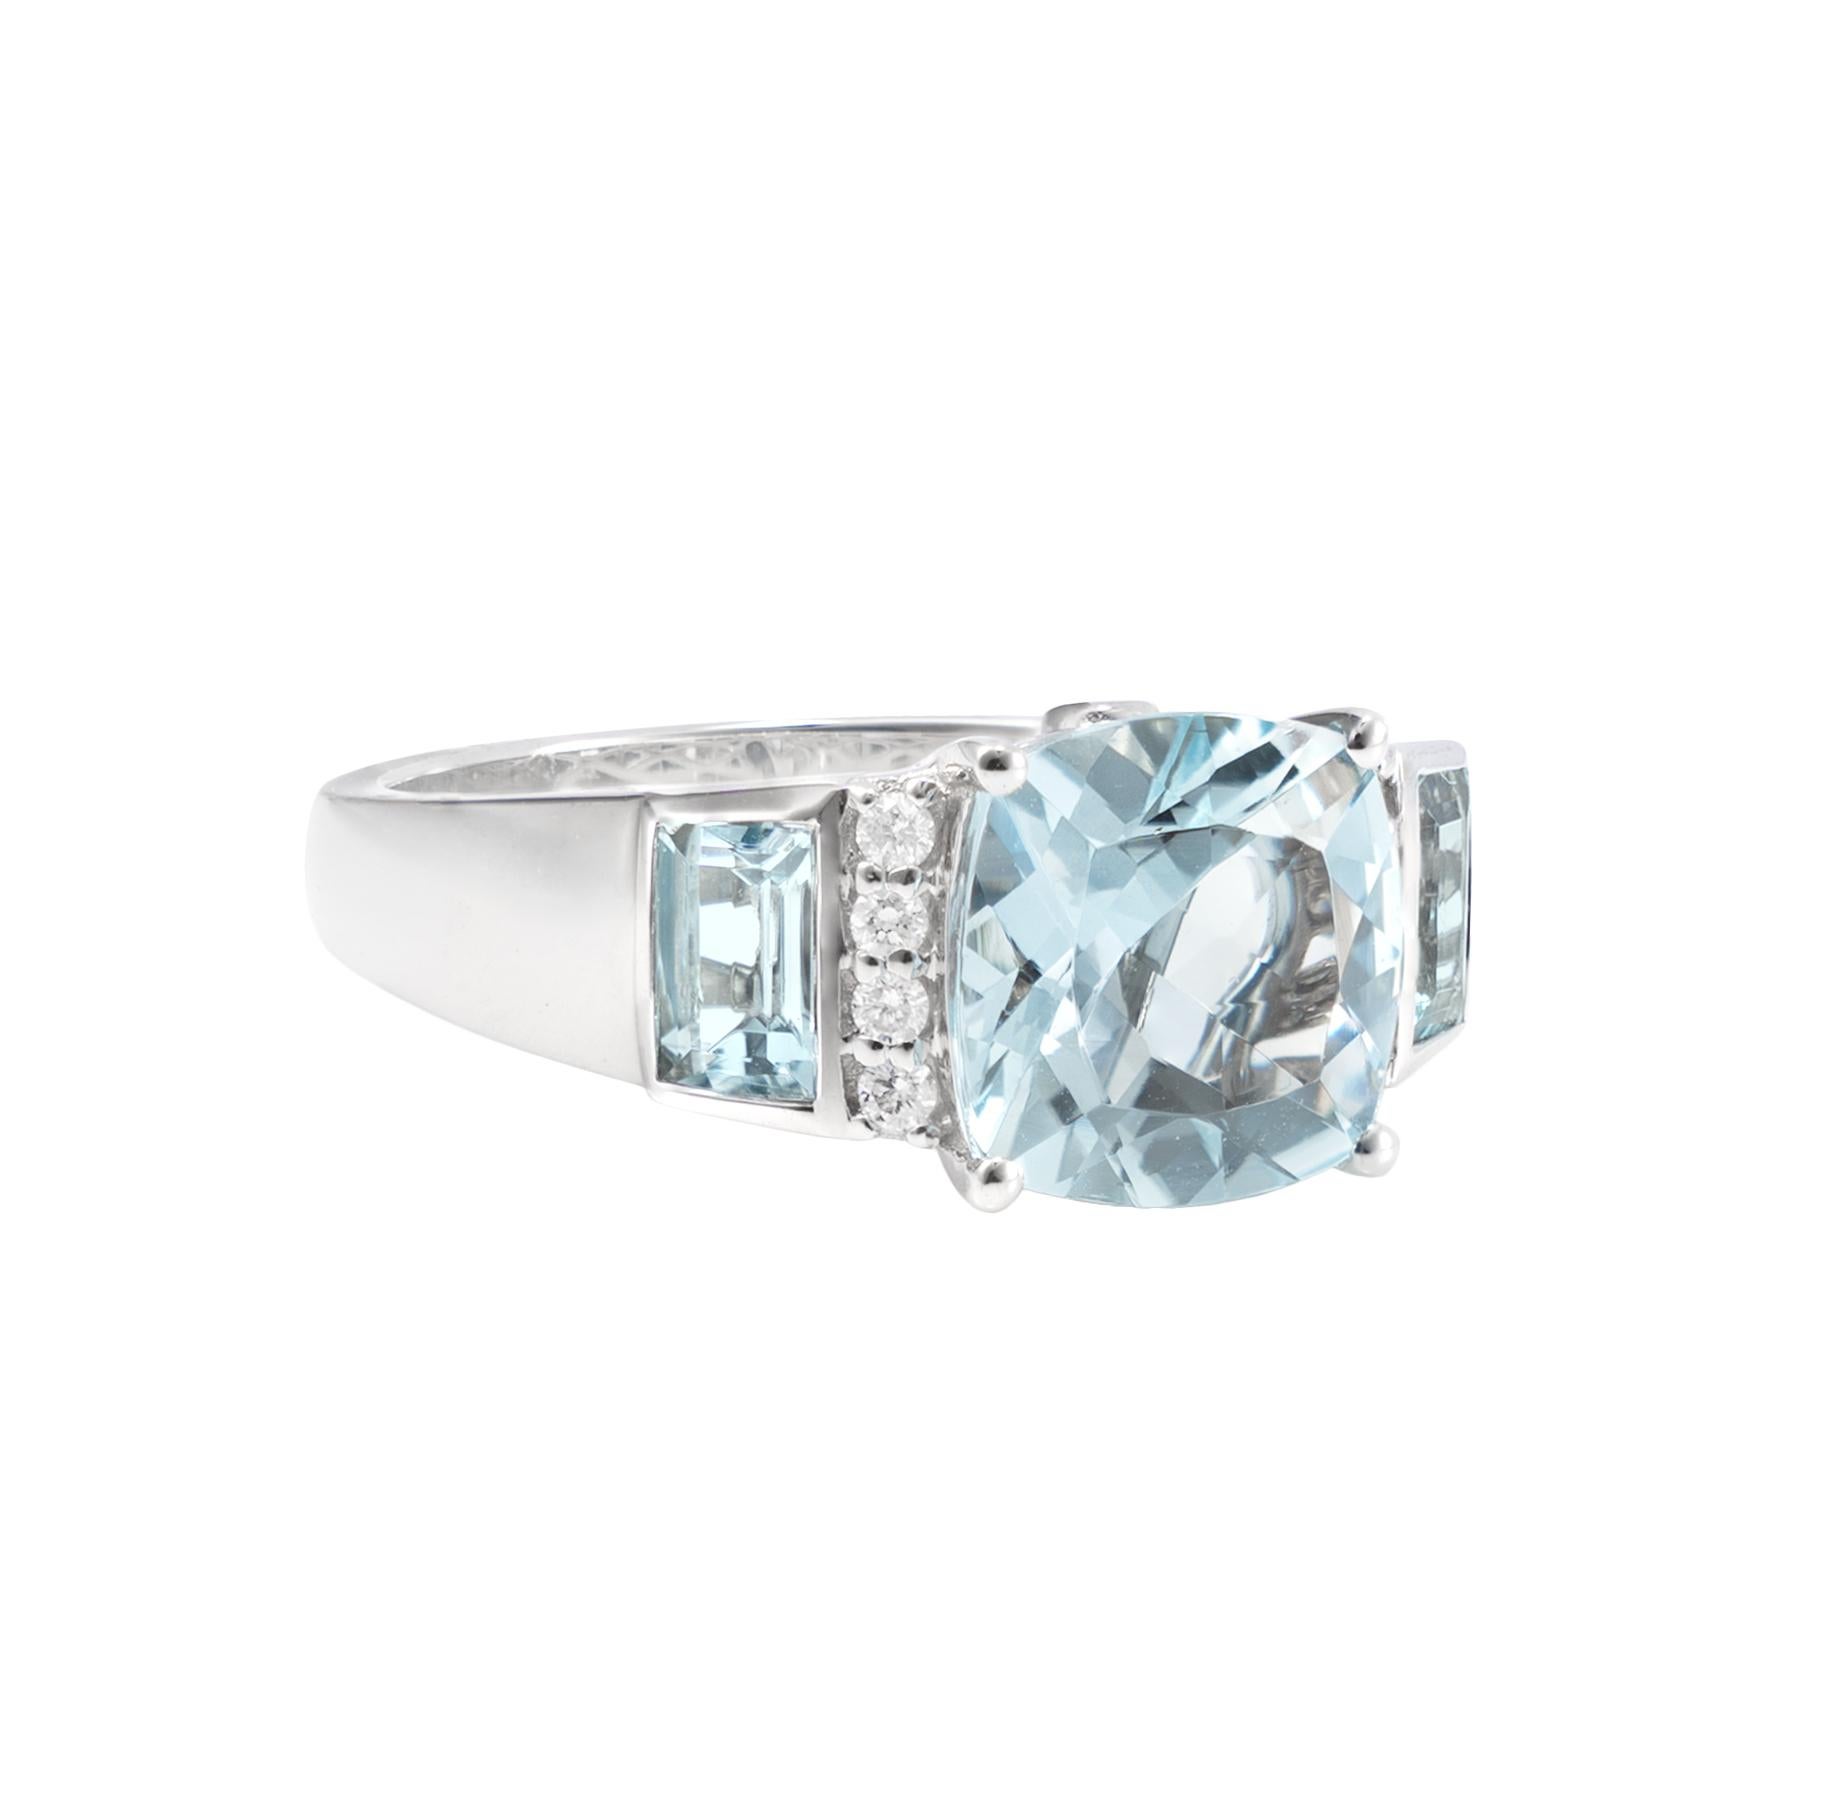 This collection features a unique collection of Men's Aquamarine Rings. Designed with baguette shaped aquamarines to accent the center stone in white gold, these rings are the perfect complementary accessory with a watch. 

Classic aquamarine men's